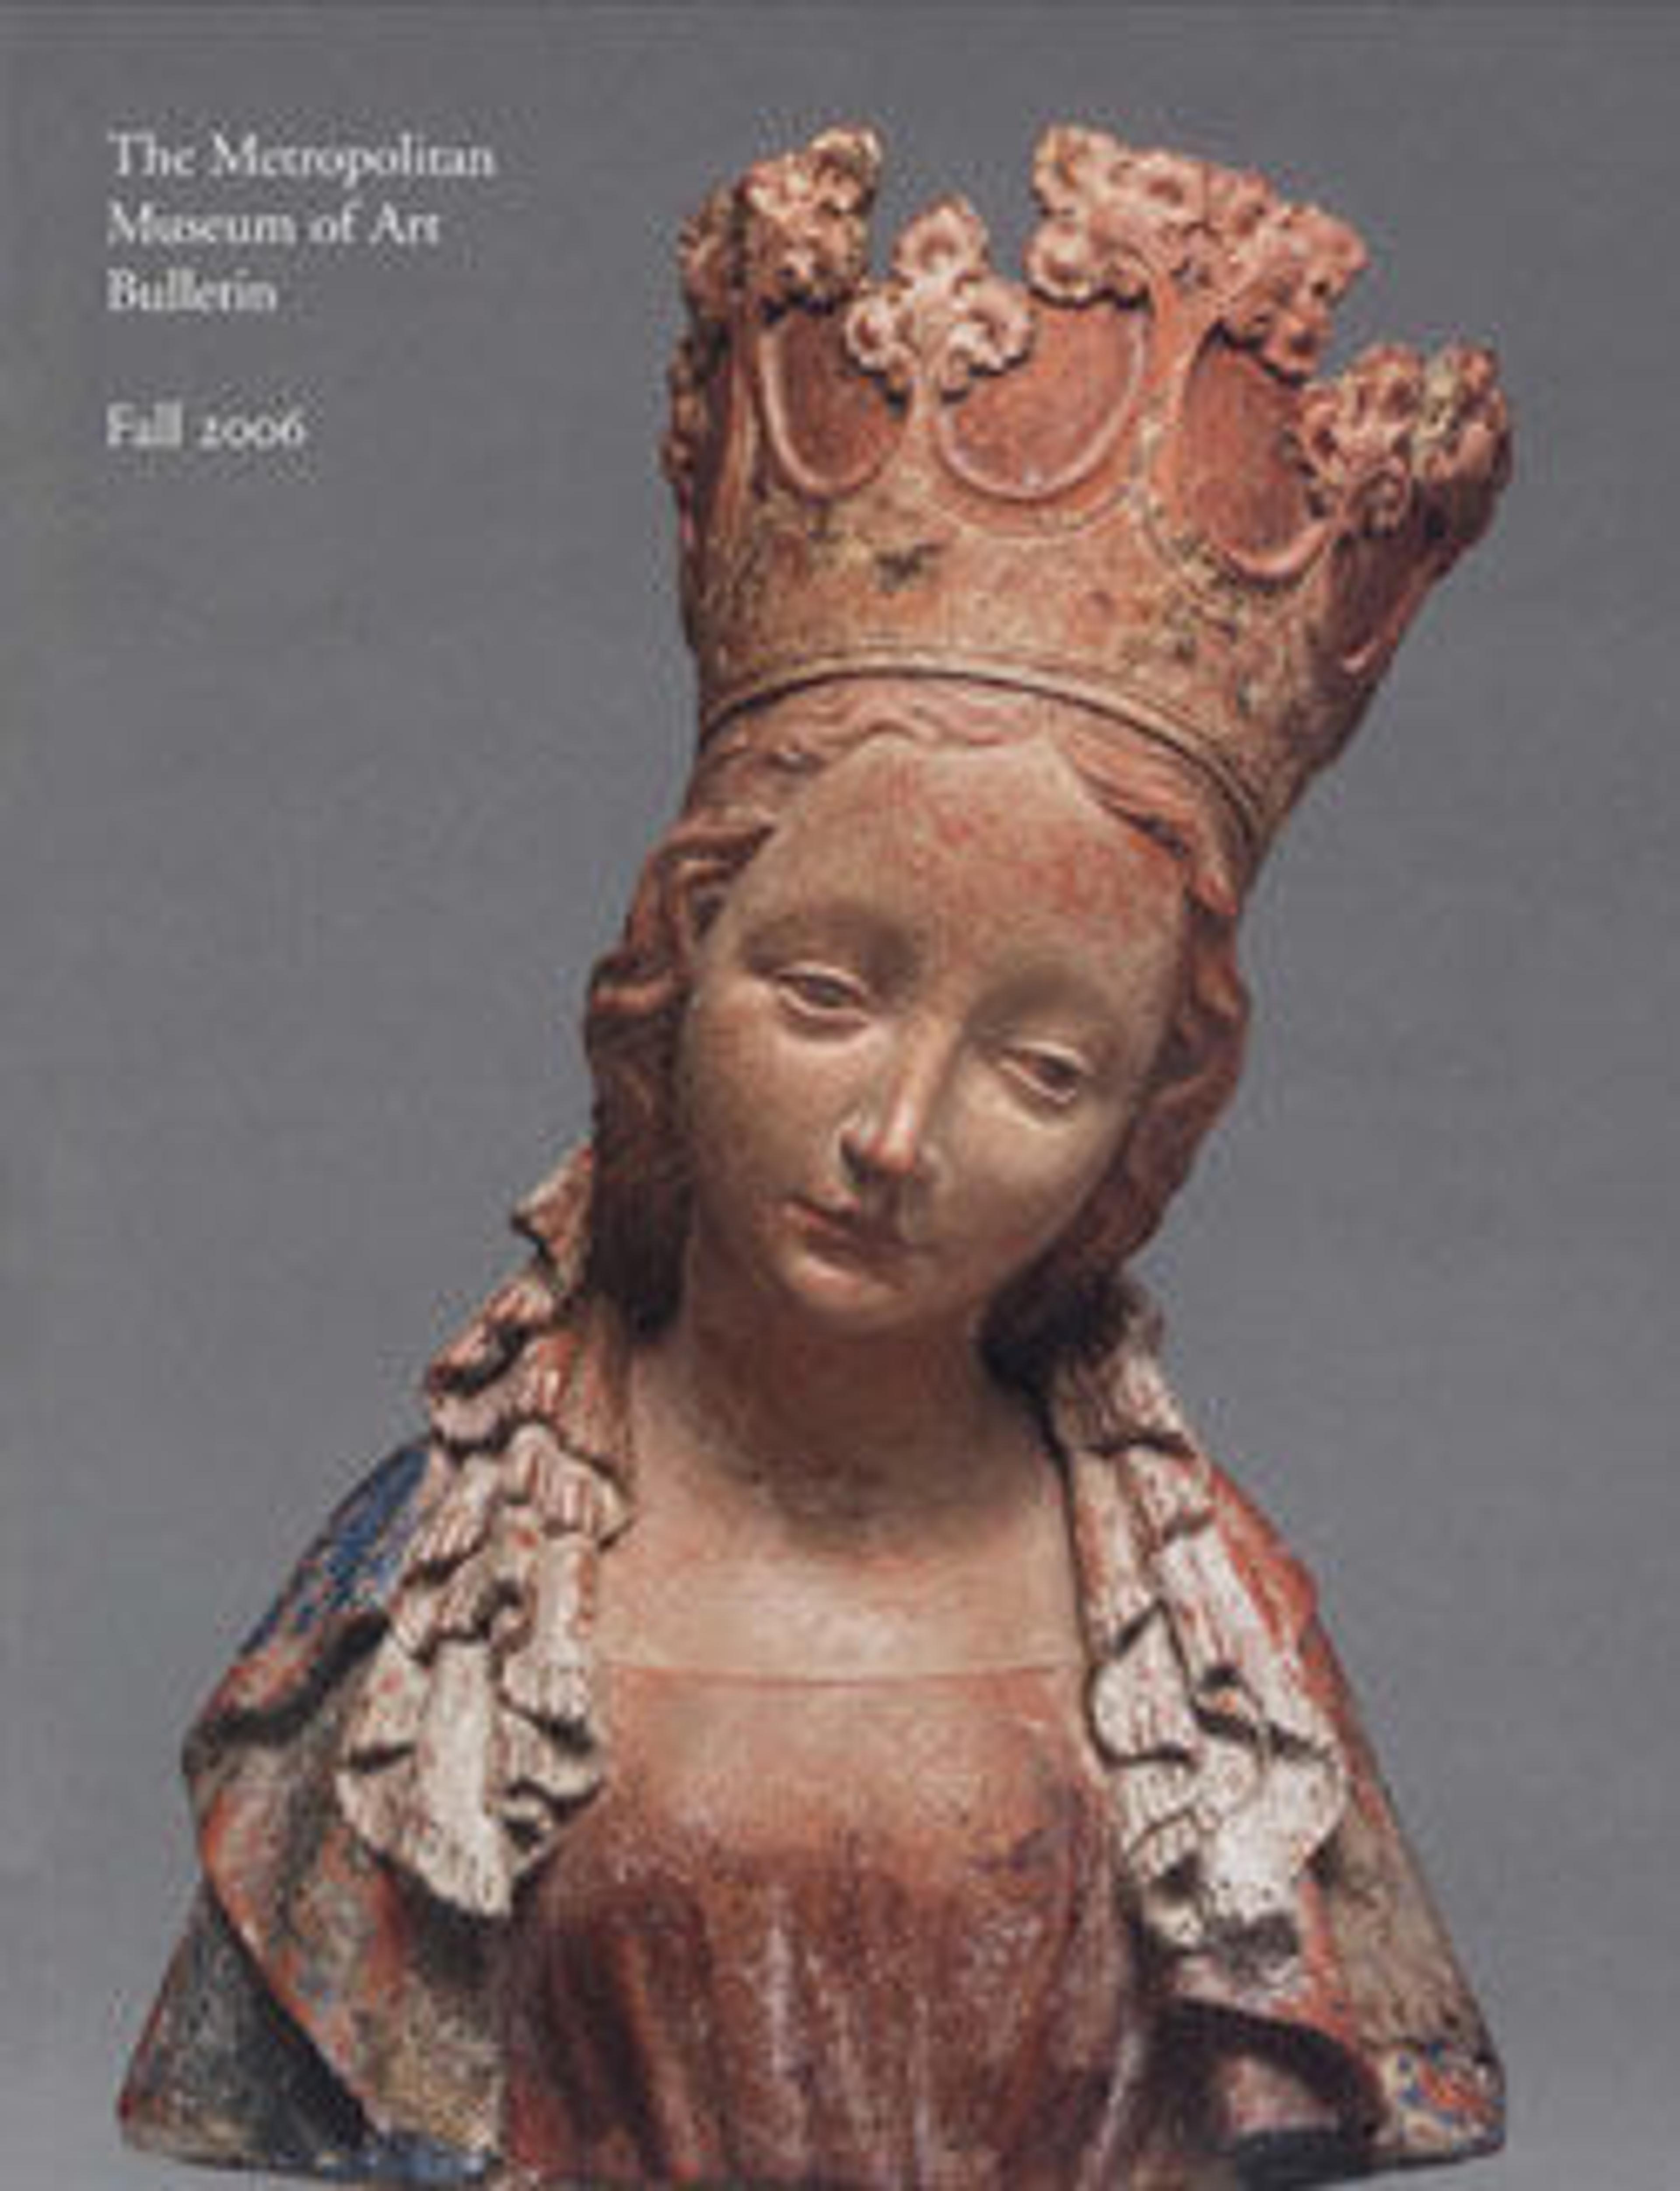 "Recent Acquisitions, A Selection: 2005-2006": The Metropolitan Museum of Art Bulletin, v. 64, no. 2 (Fall, 2006)